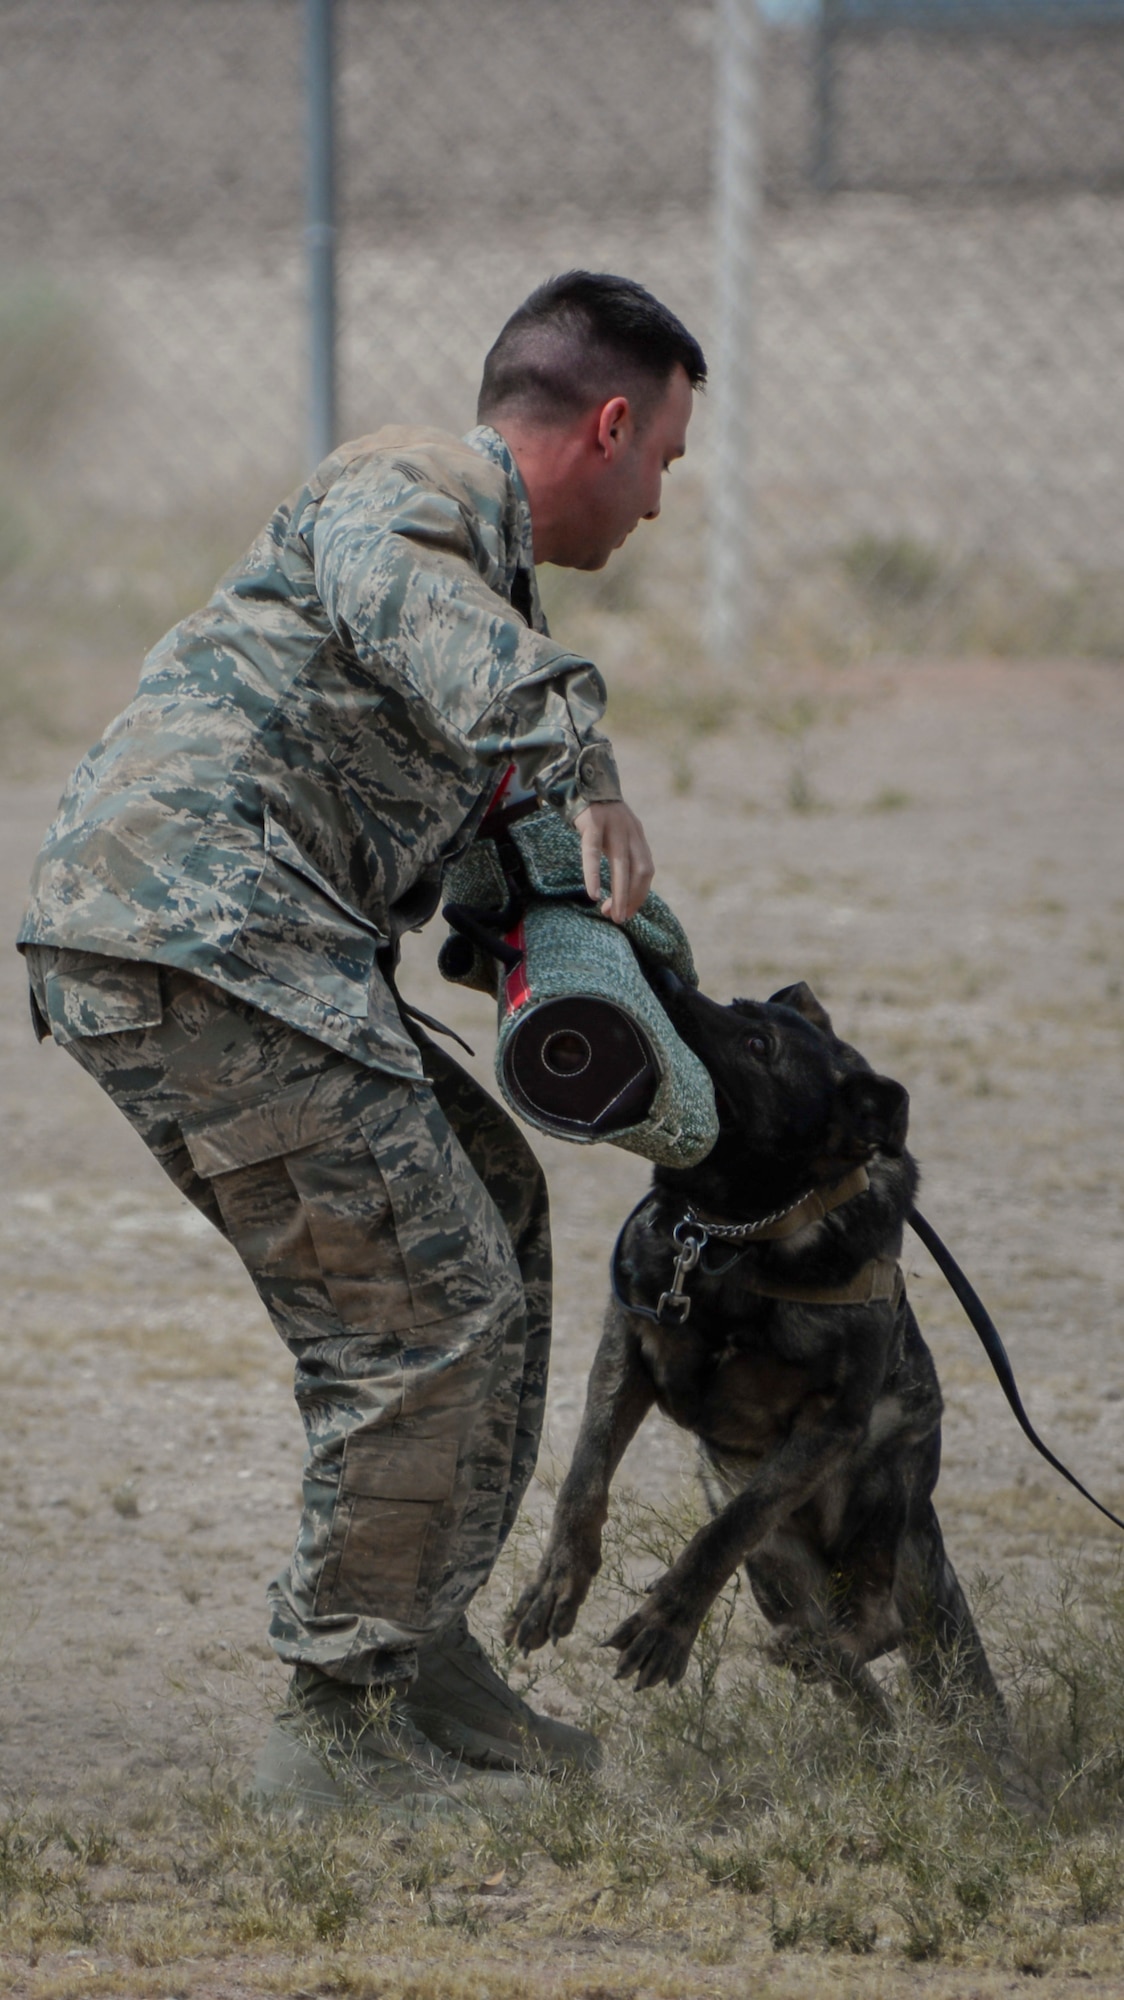 ‘PJ’, 99th Security Forces Squadron military working dog, bites the arm pad during a MWD demonstration at Nellis Air Force Base, Nev., April 7, 2016. The constant training coupled with the unique bond between handler and dog is what allows the 99th SFS MWD unit to be mission ready and consistently perform at the highest level. (U.S. Air Force photo by Airman 1st Class Nathan Byrnes)